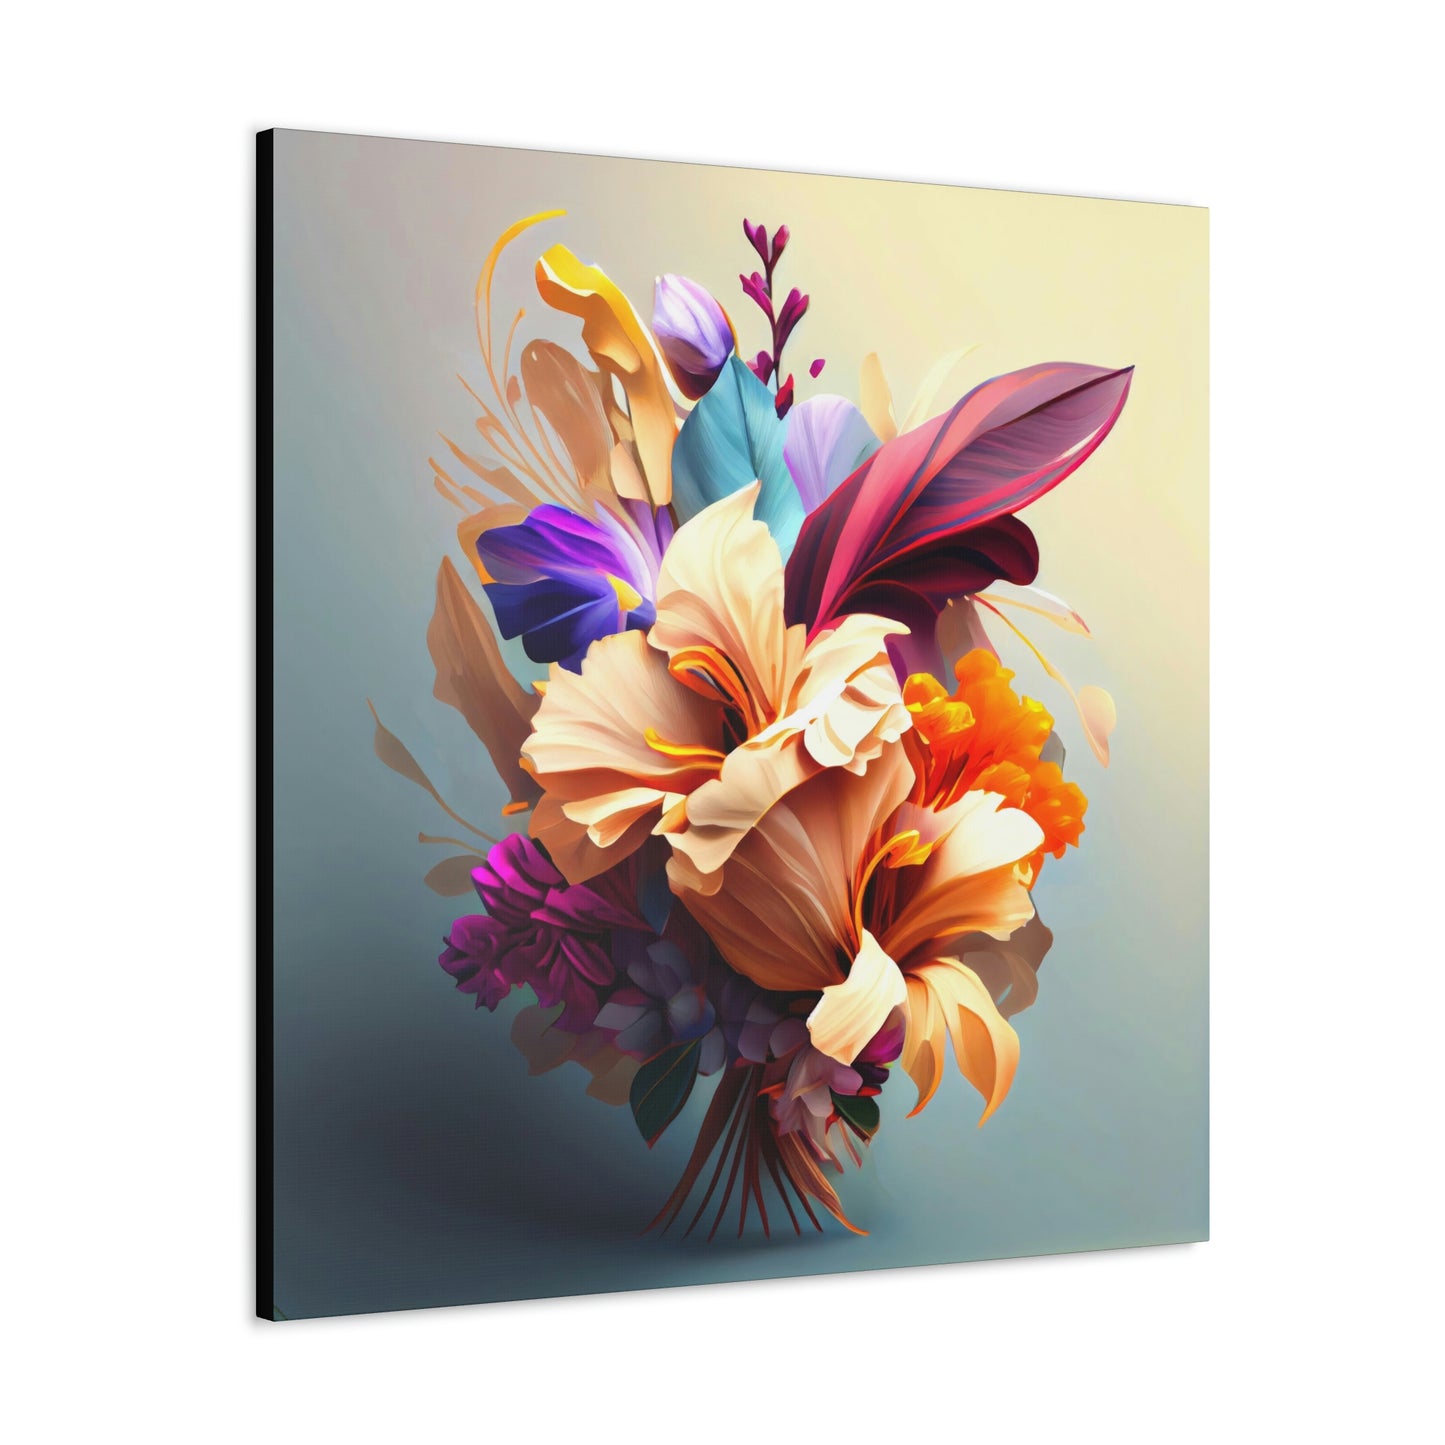 Flowervision - Canvas Wall Art